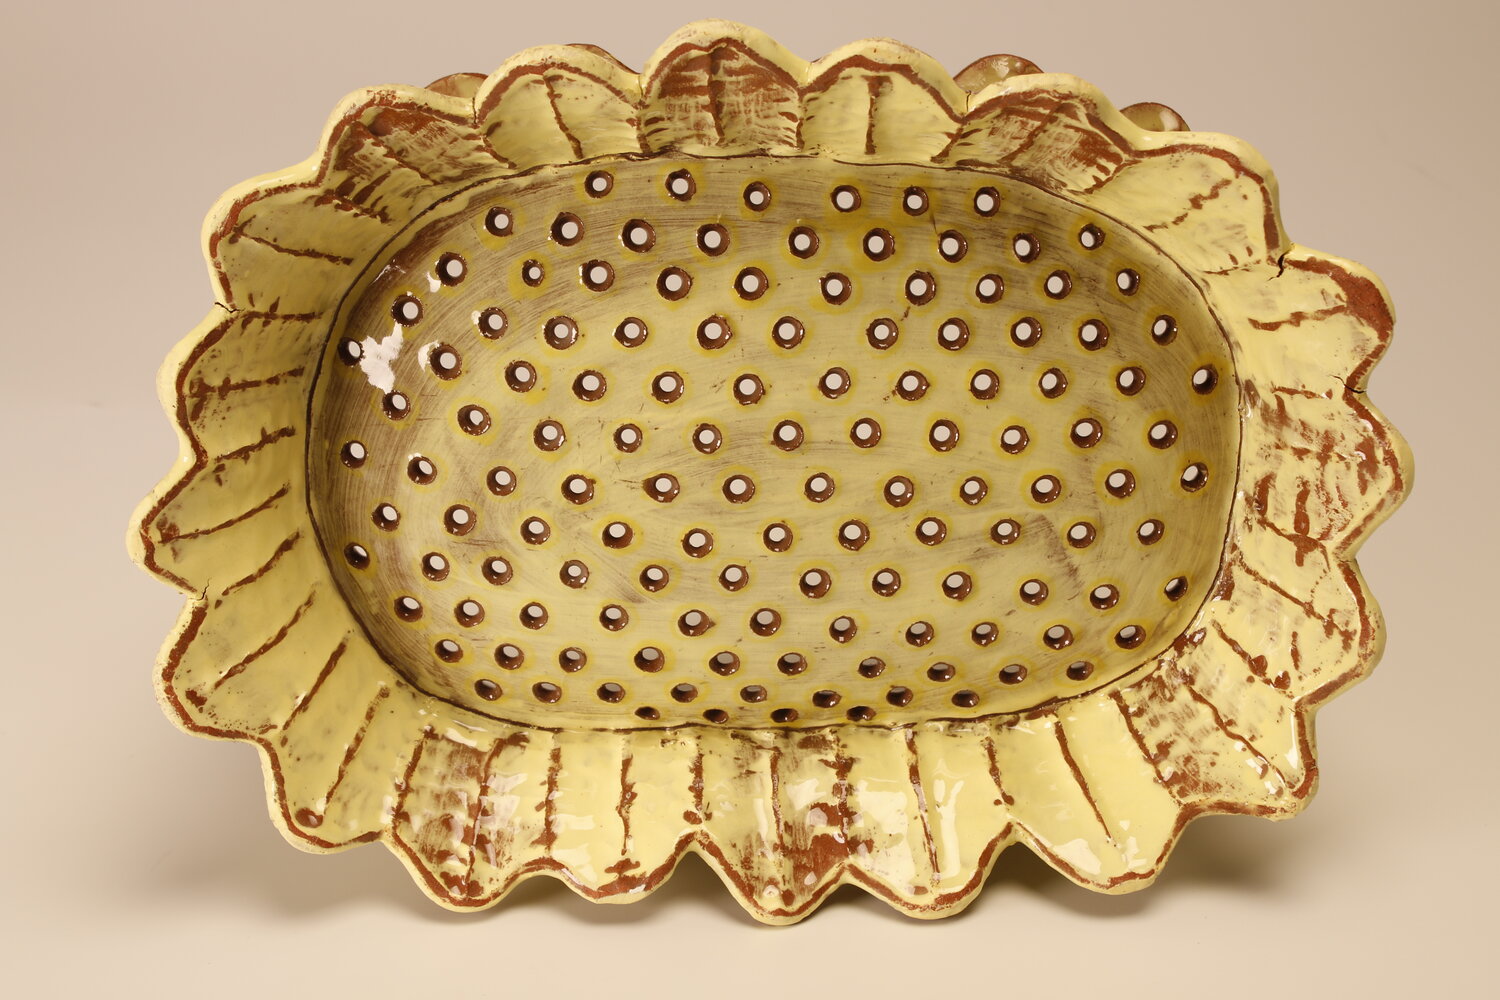 A pale yellow ceramic colander in the shape of a sunflower, image courtesy of the artist